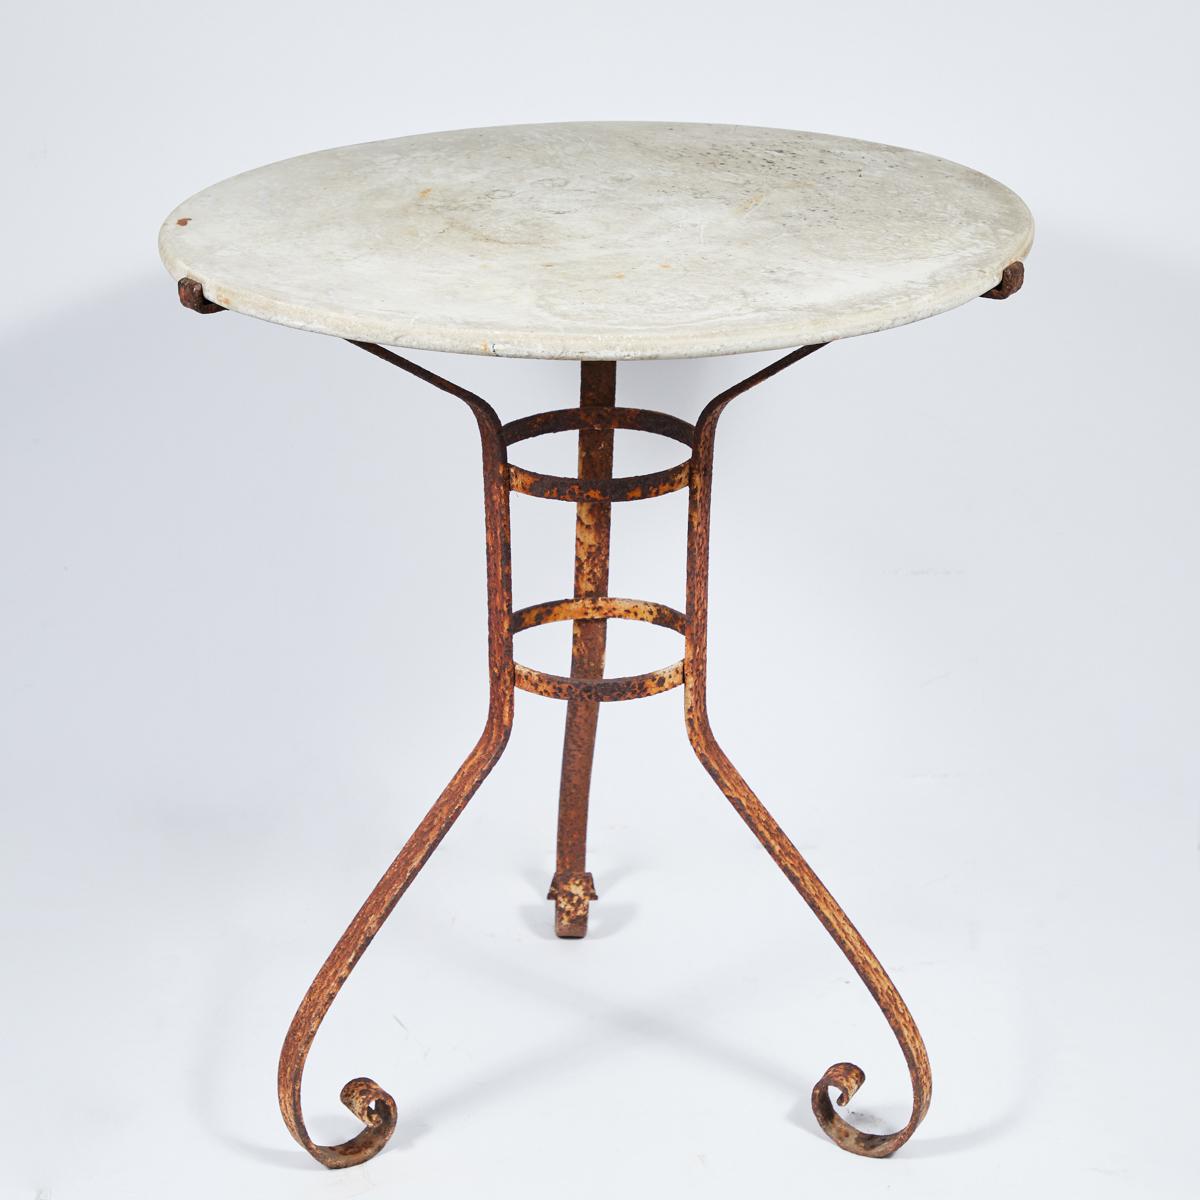 Round Marble-Top and Iron Garden Table from Late 19th Century France 2